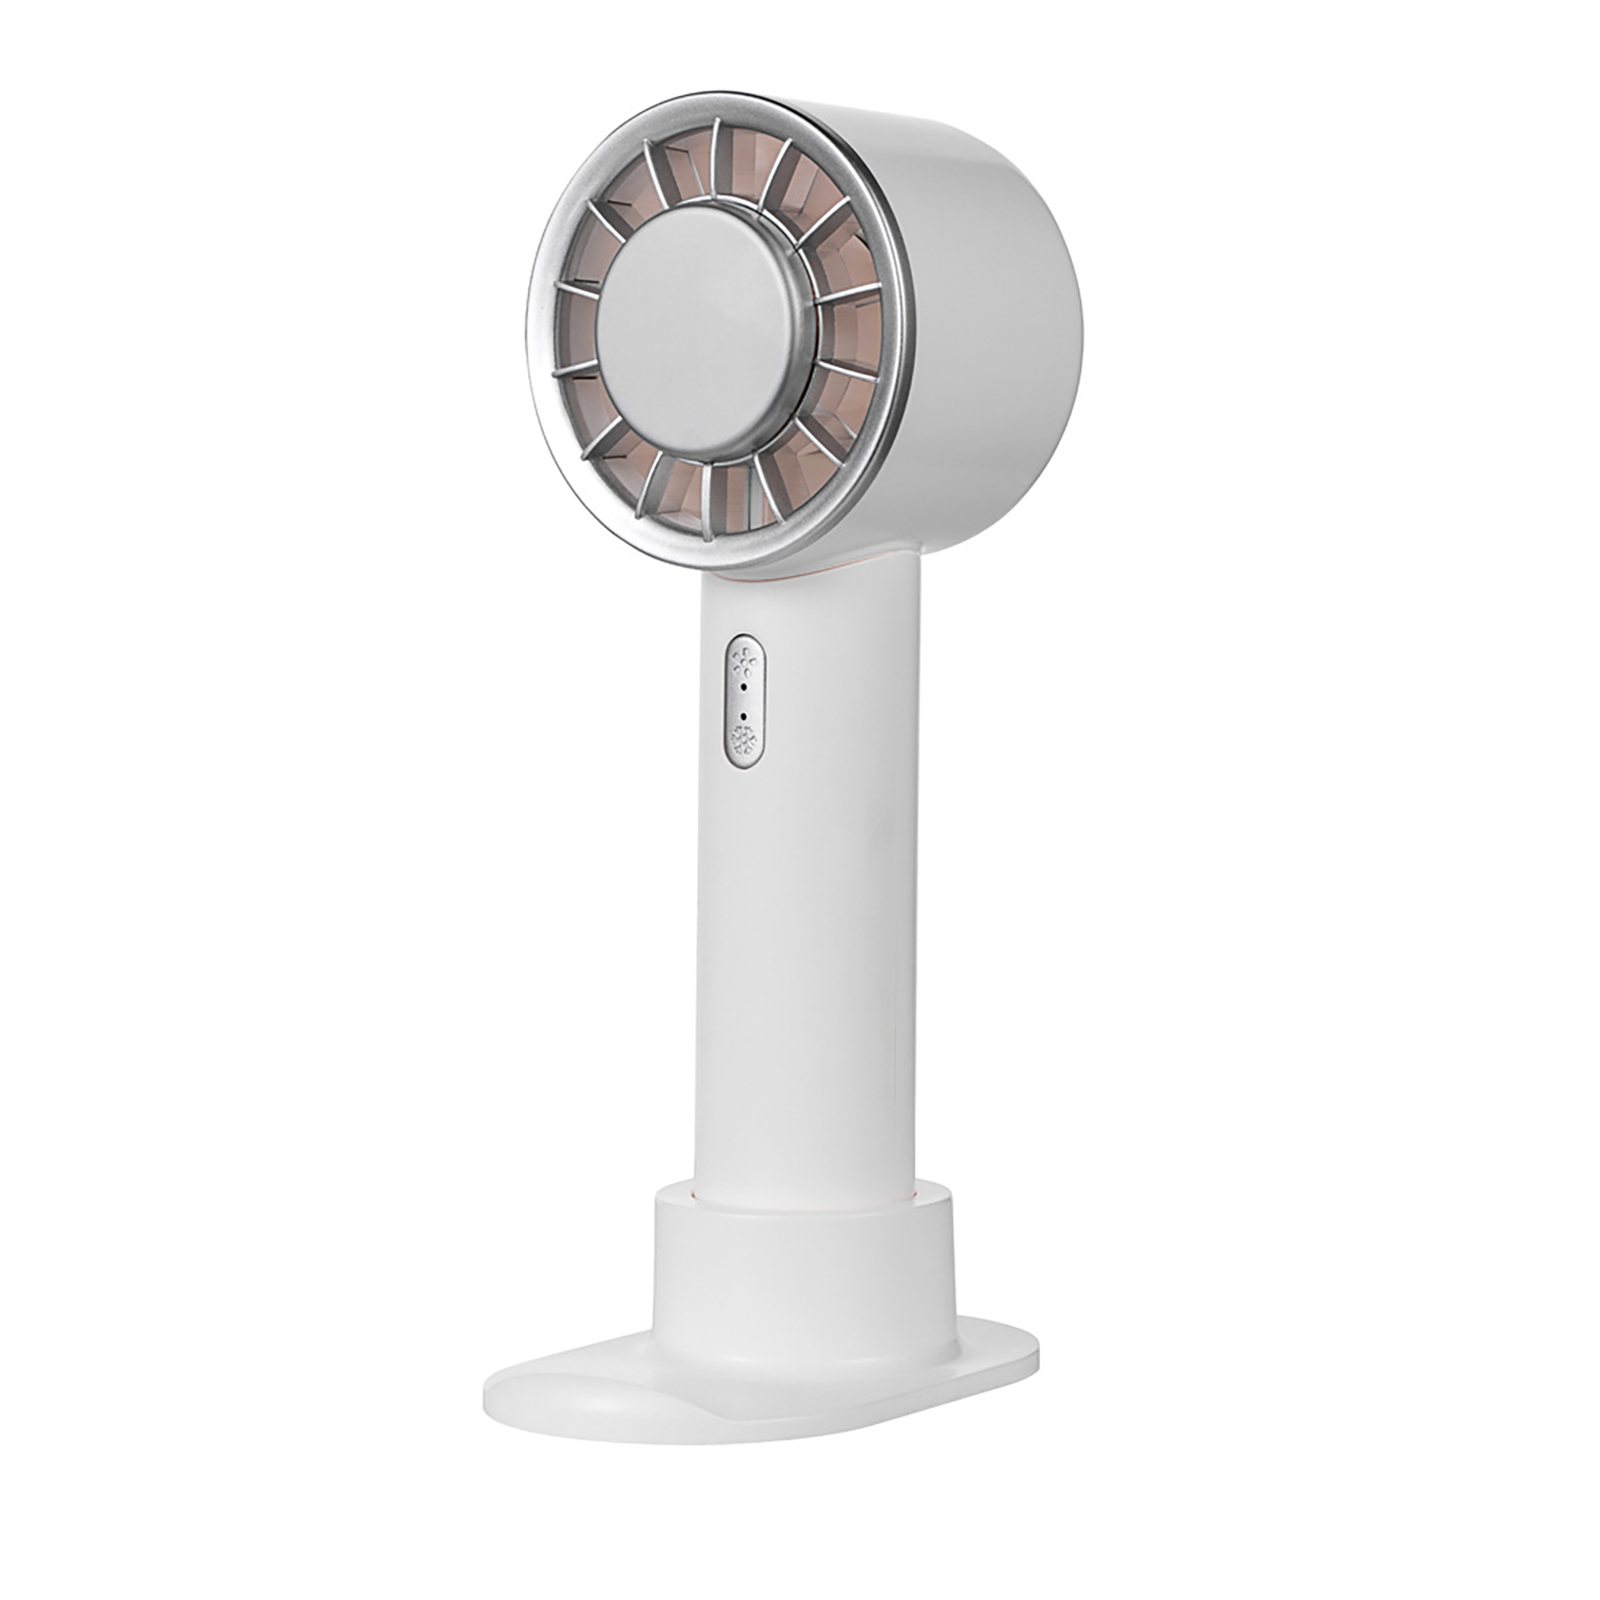 Portable Mini Handheld Fan 3 Speeds 2200mah Battery Usb Rechargeable Cooling Fan For Work Travel Sports White